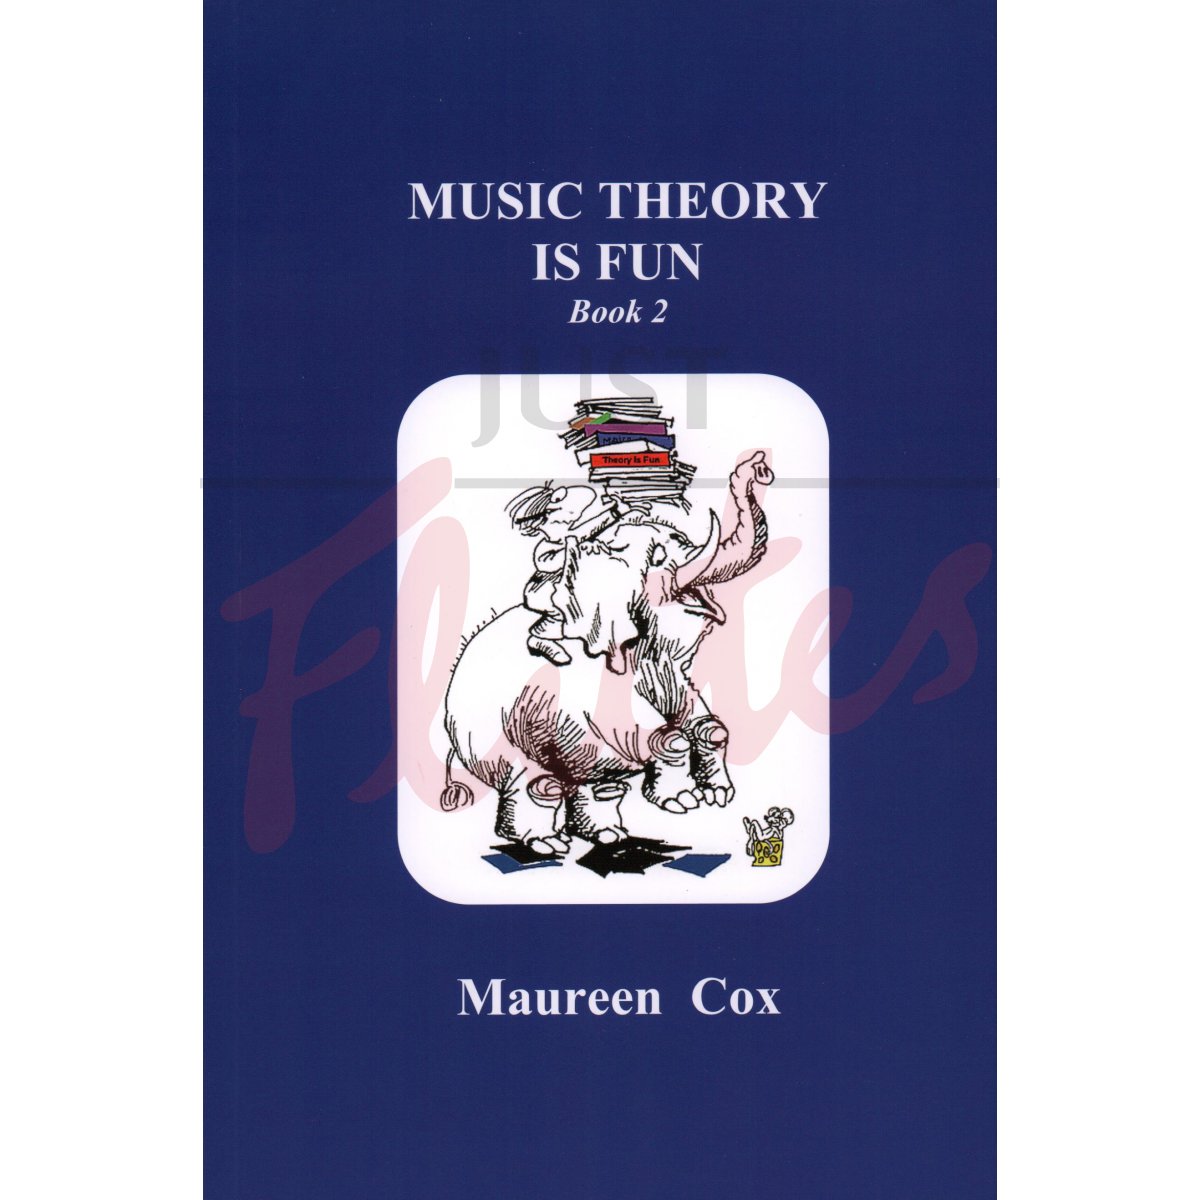 Music Theory Is Fun Book 2 (Revised)